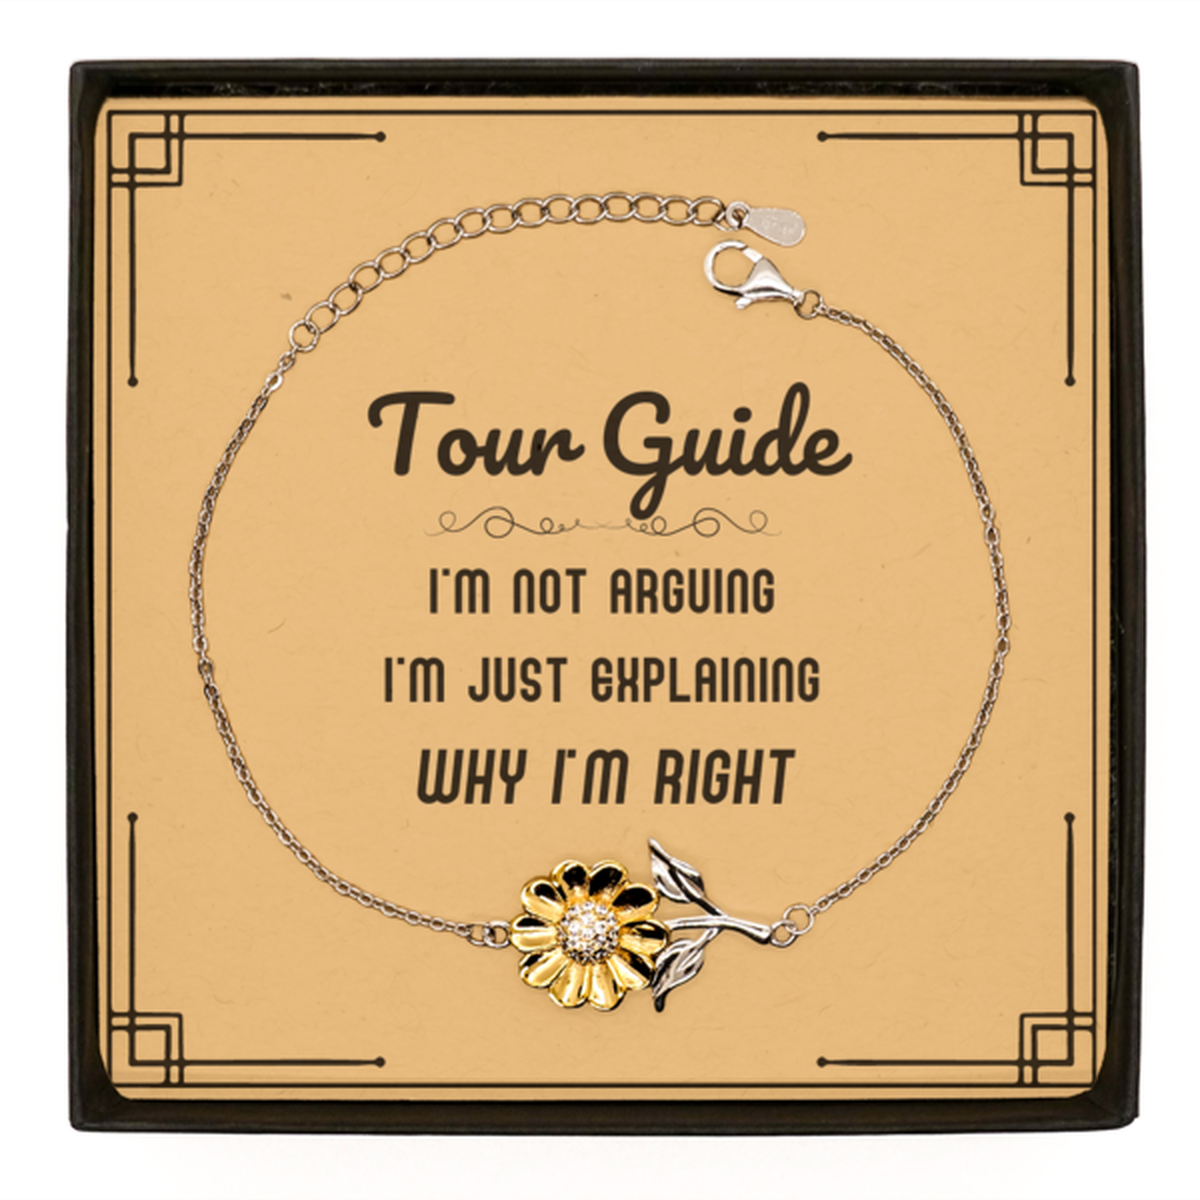 Tour Guide I'm not Arguing. I'm Just Explaining Why I'm RIGHT Sunflower Bracelet, Funny Saying Quote Tour Guide Gifts For Tour Guide Message Card Graduation Birthday Christmas Gifts for Men Women Coworker